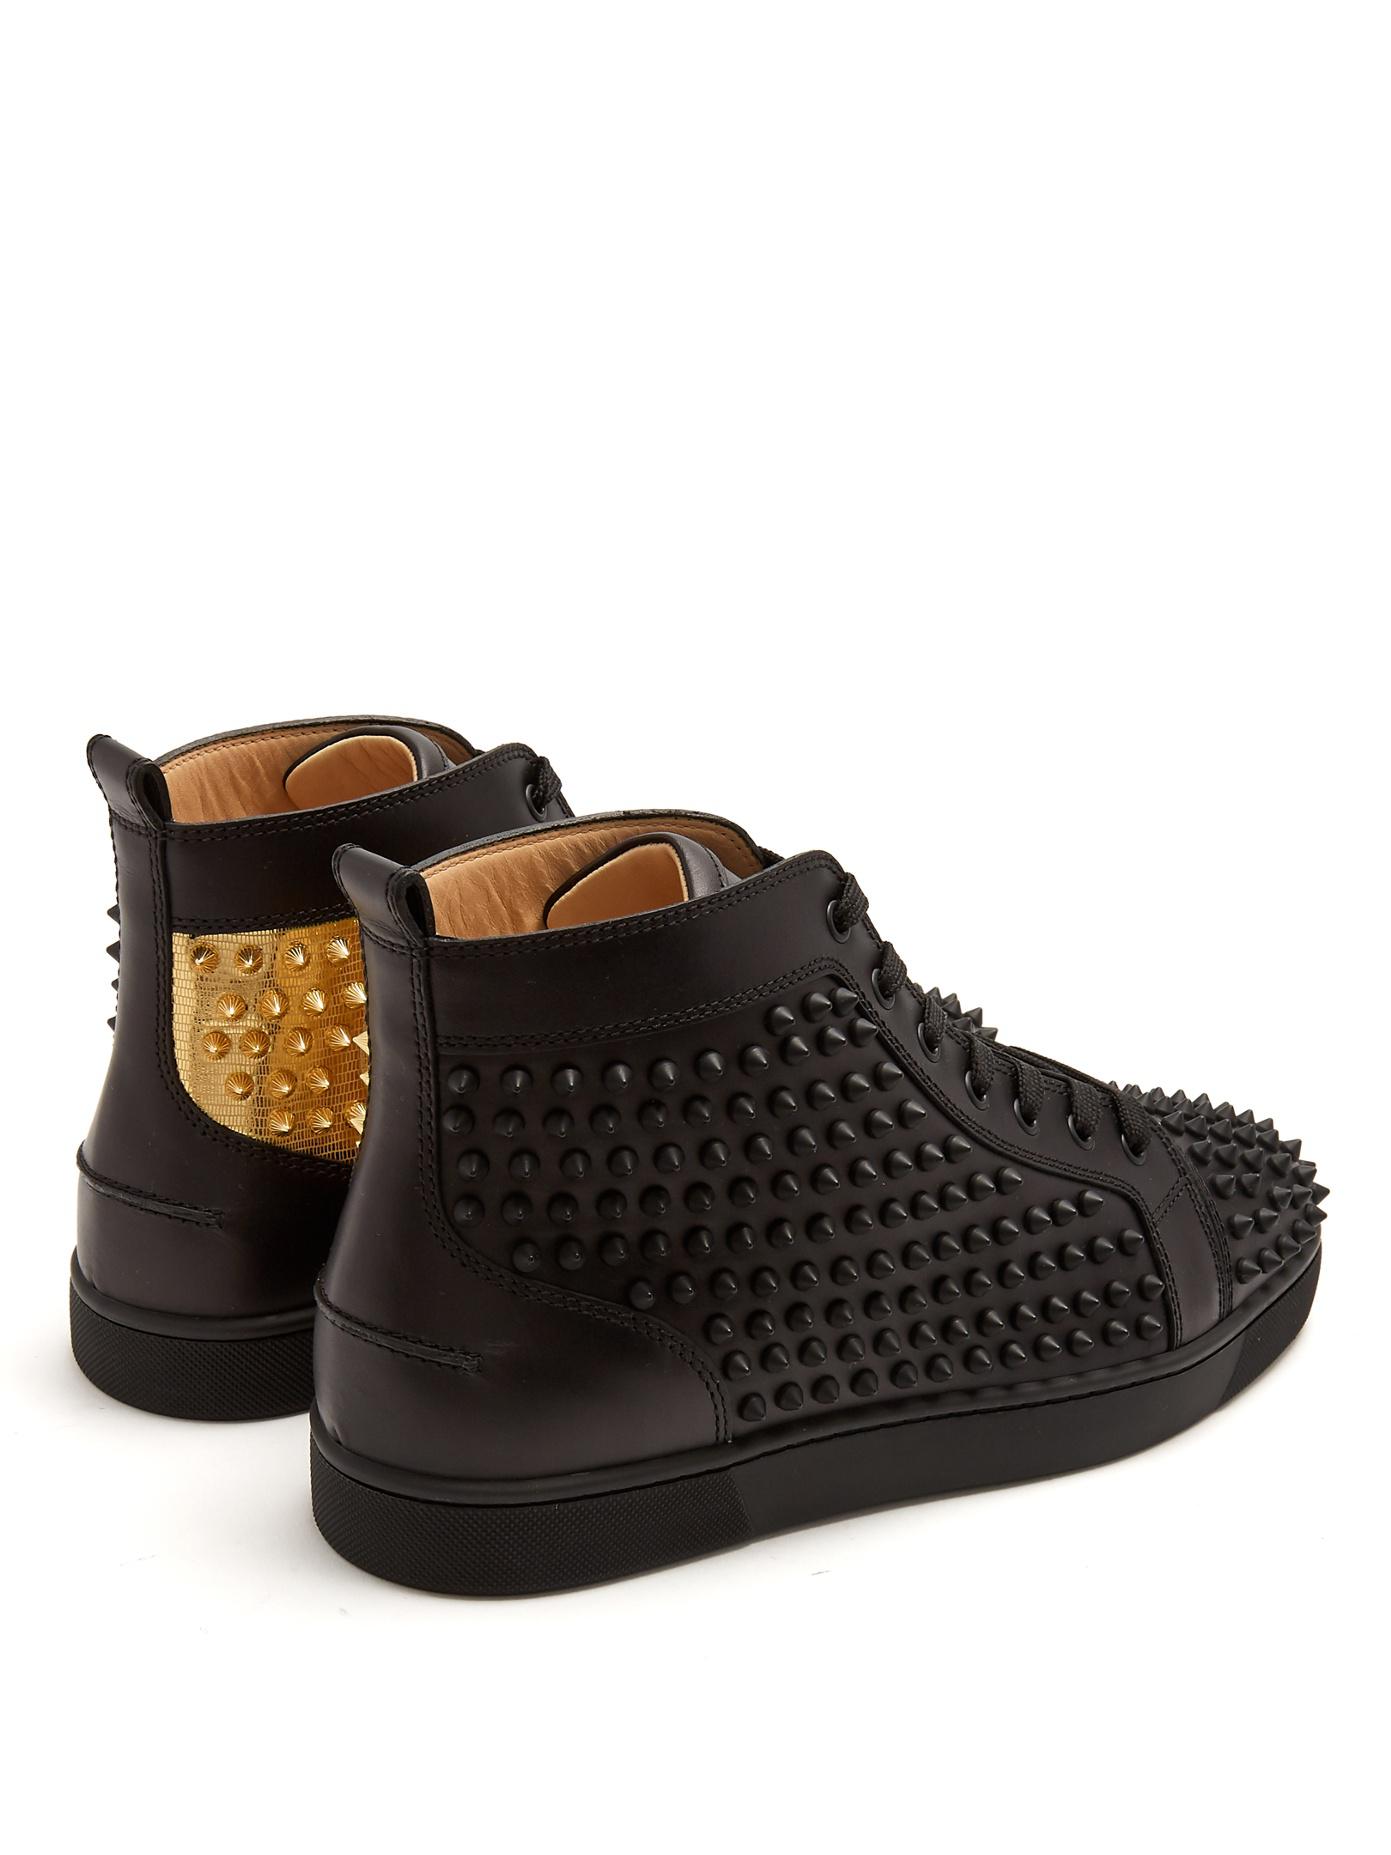 Christian Louboutin Leather Louis Spike-embellished High-top in Black for Men - Lyst